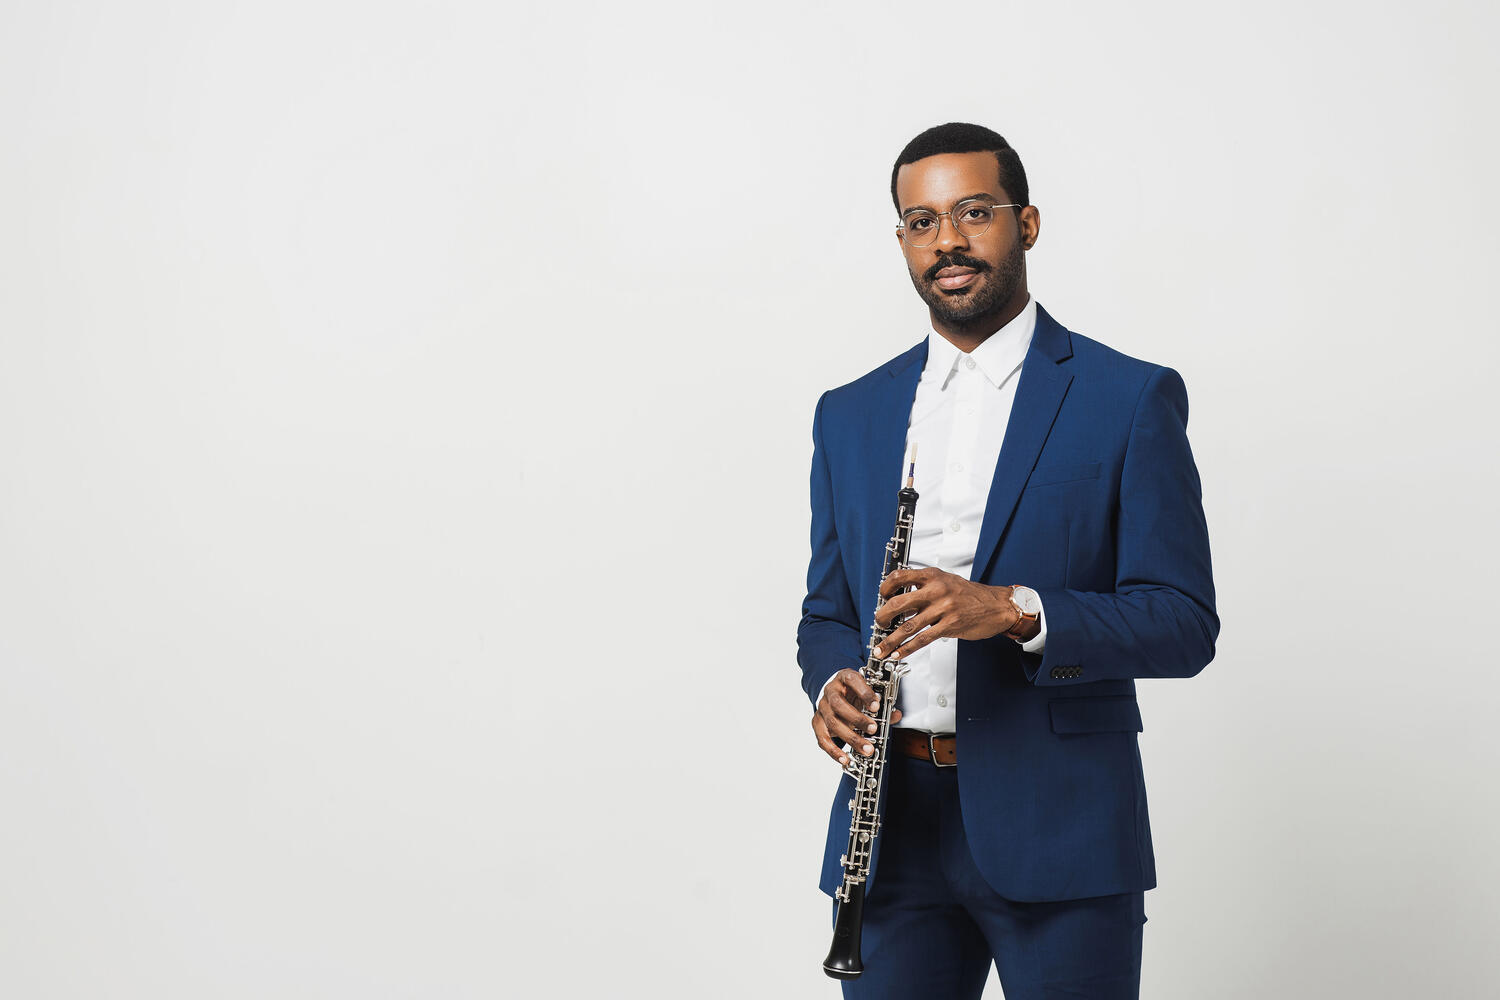 Titus Underwood wearing a blue suit, holding an oboe